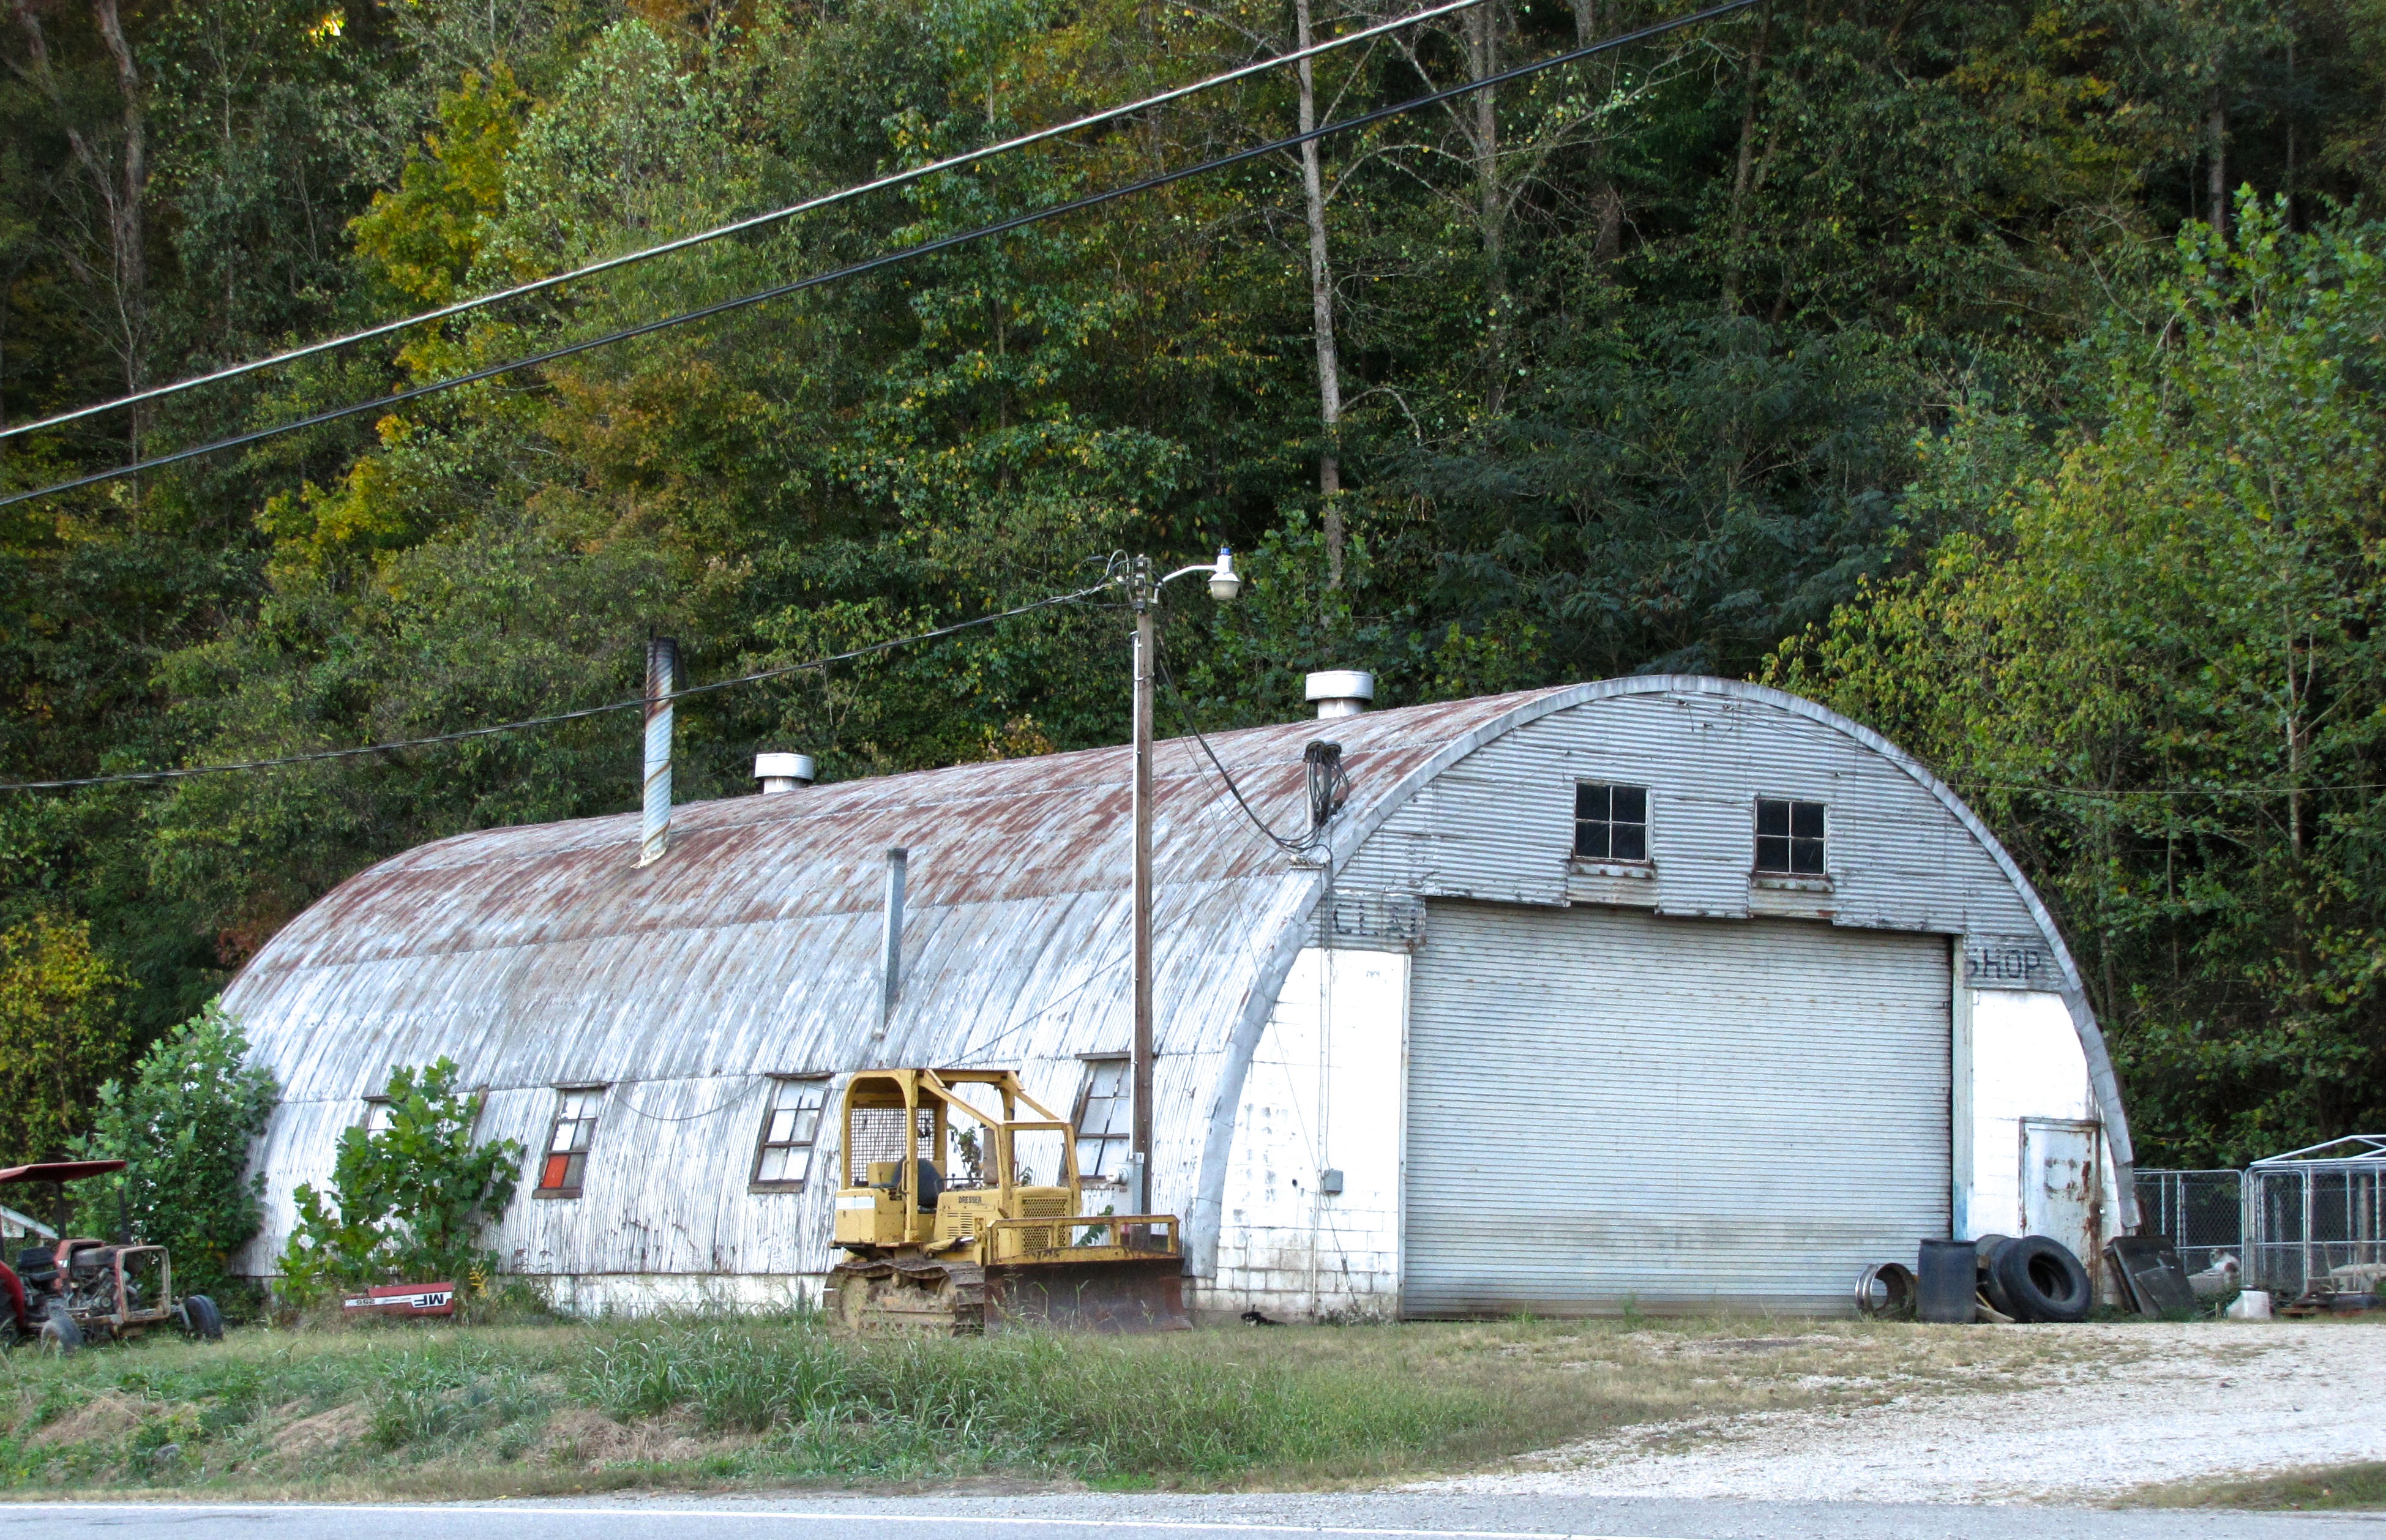 quonset hut in Branchland, WV